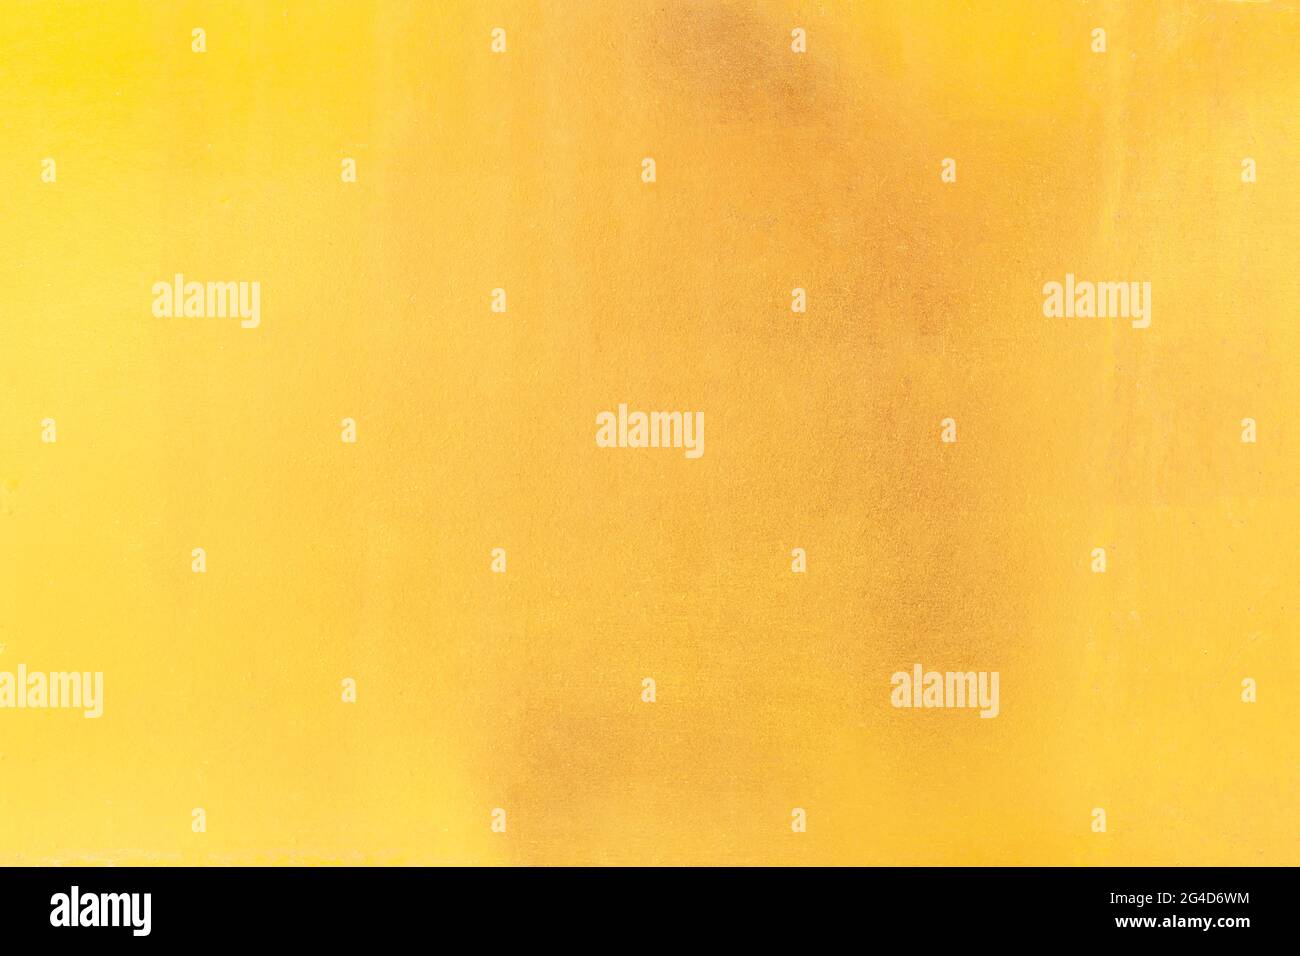 Gold abstract background or texture and gradients shadow horizontal shape Stock Photo